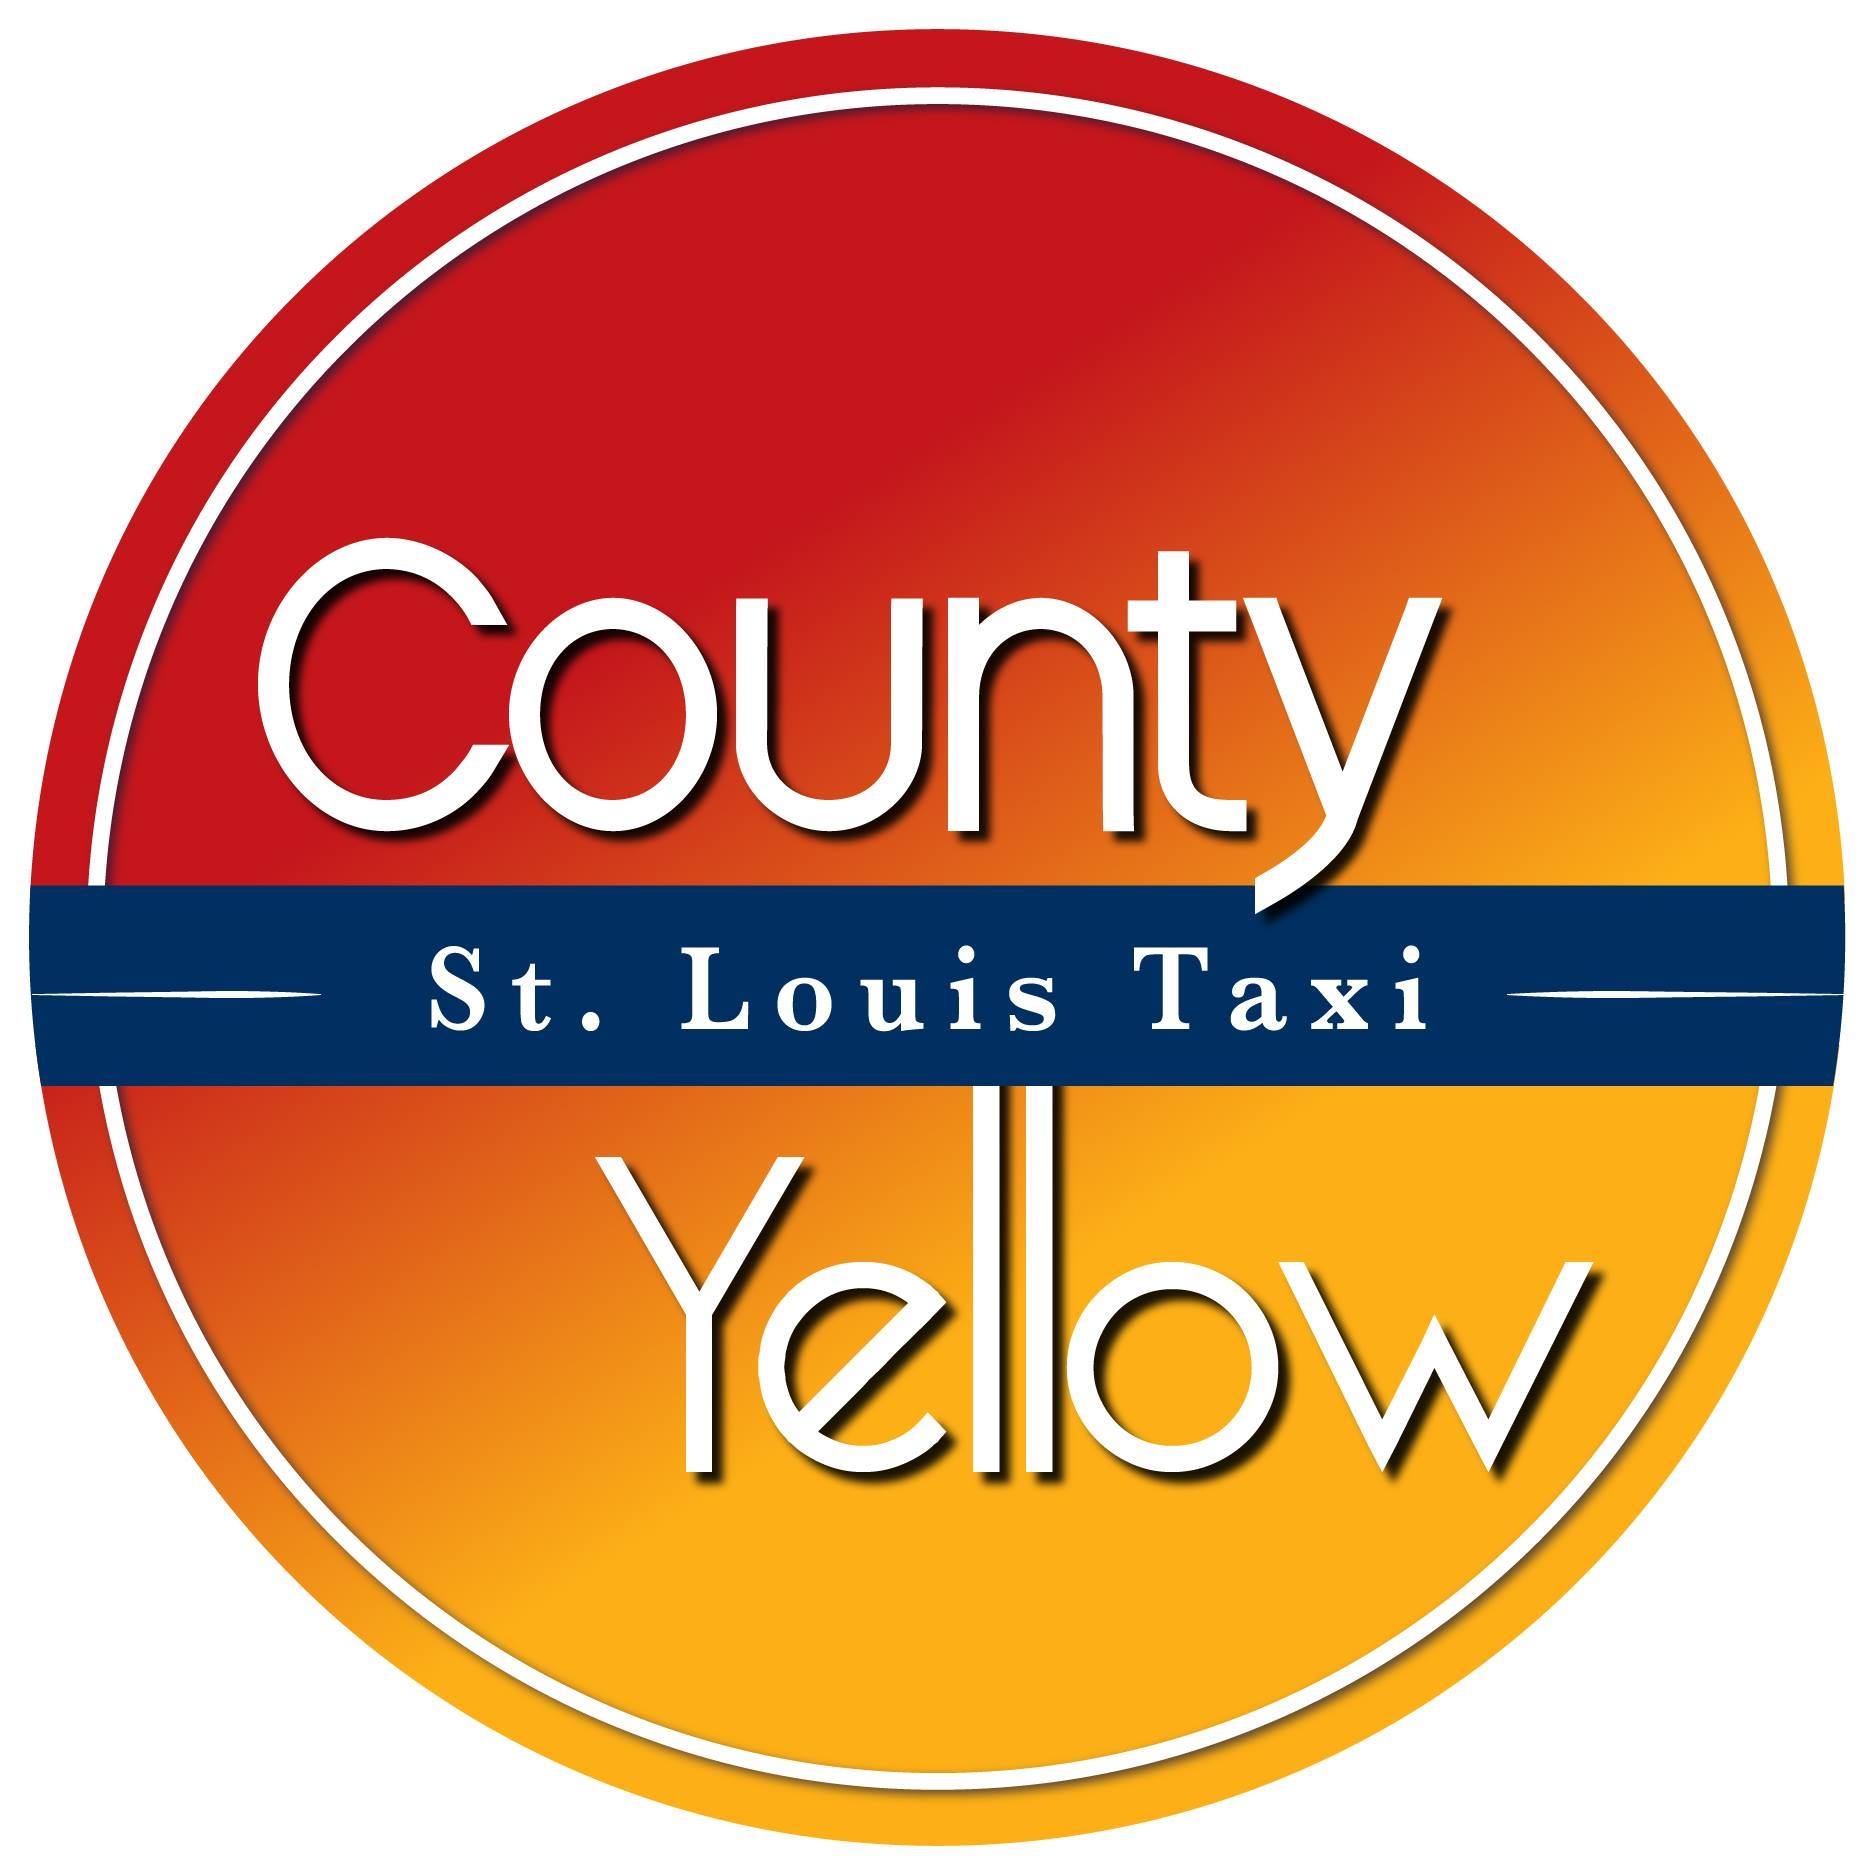 Company logo of St. Louis County & Yellow Taxi